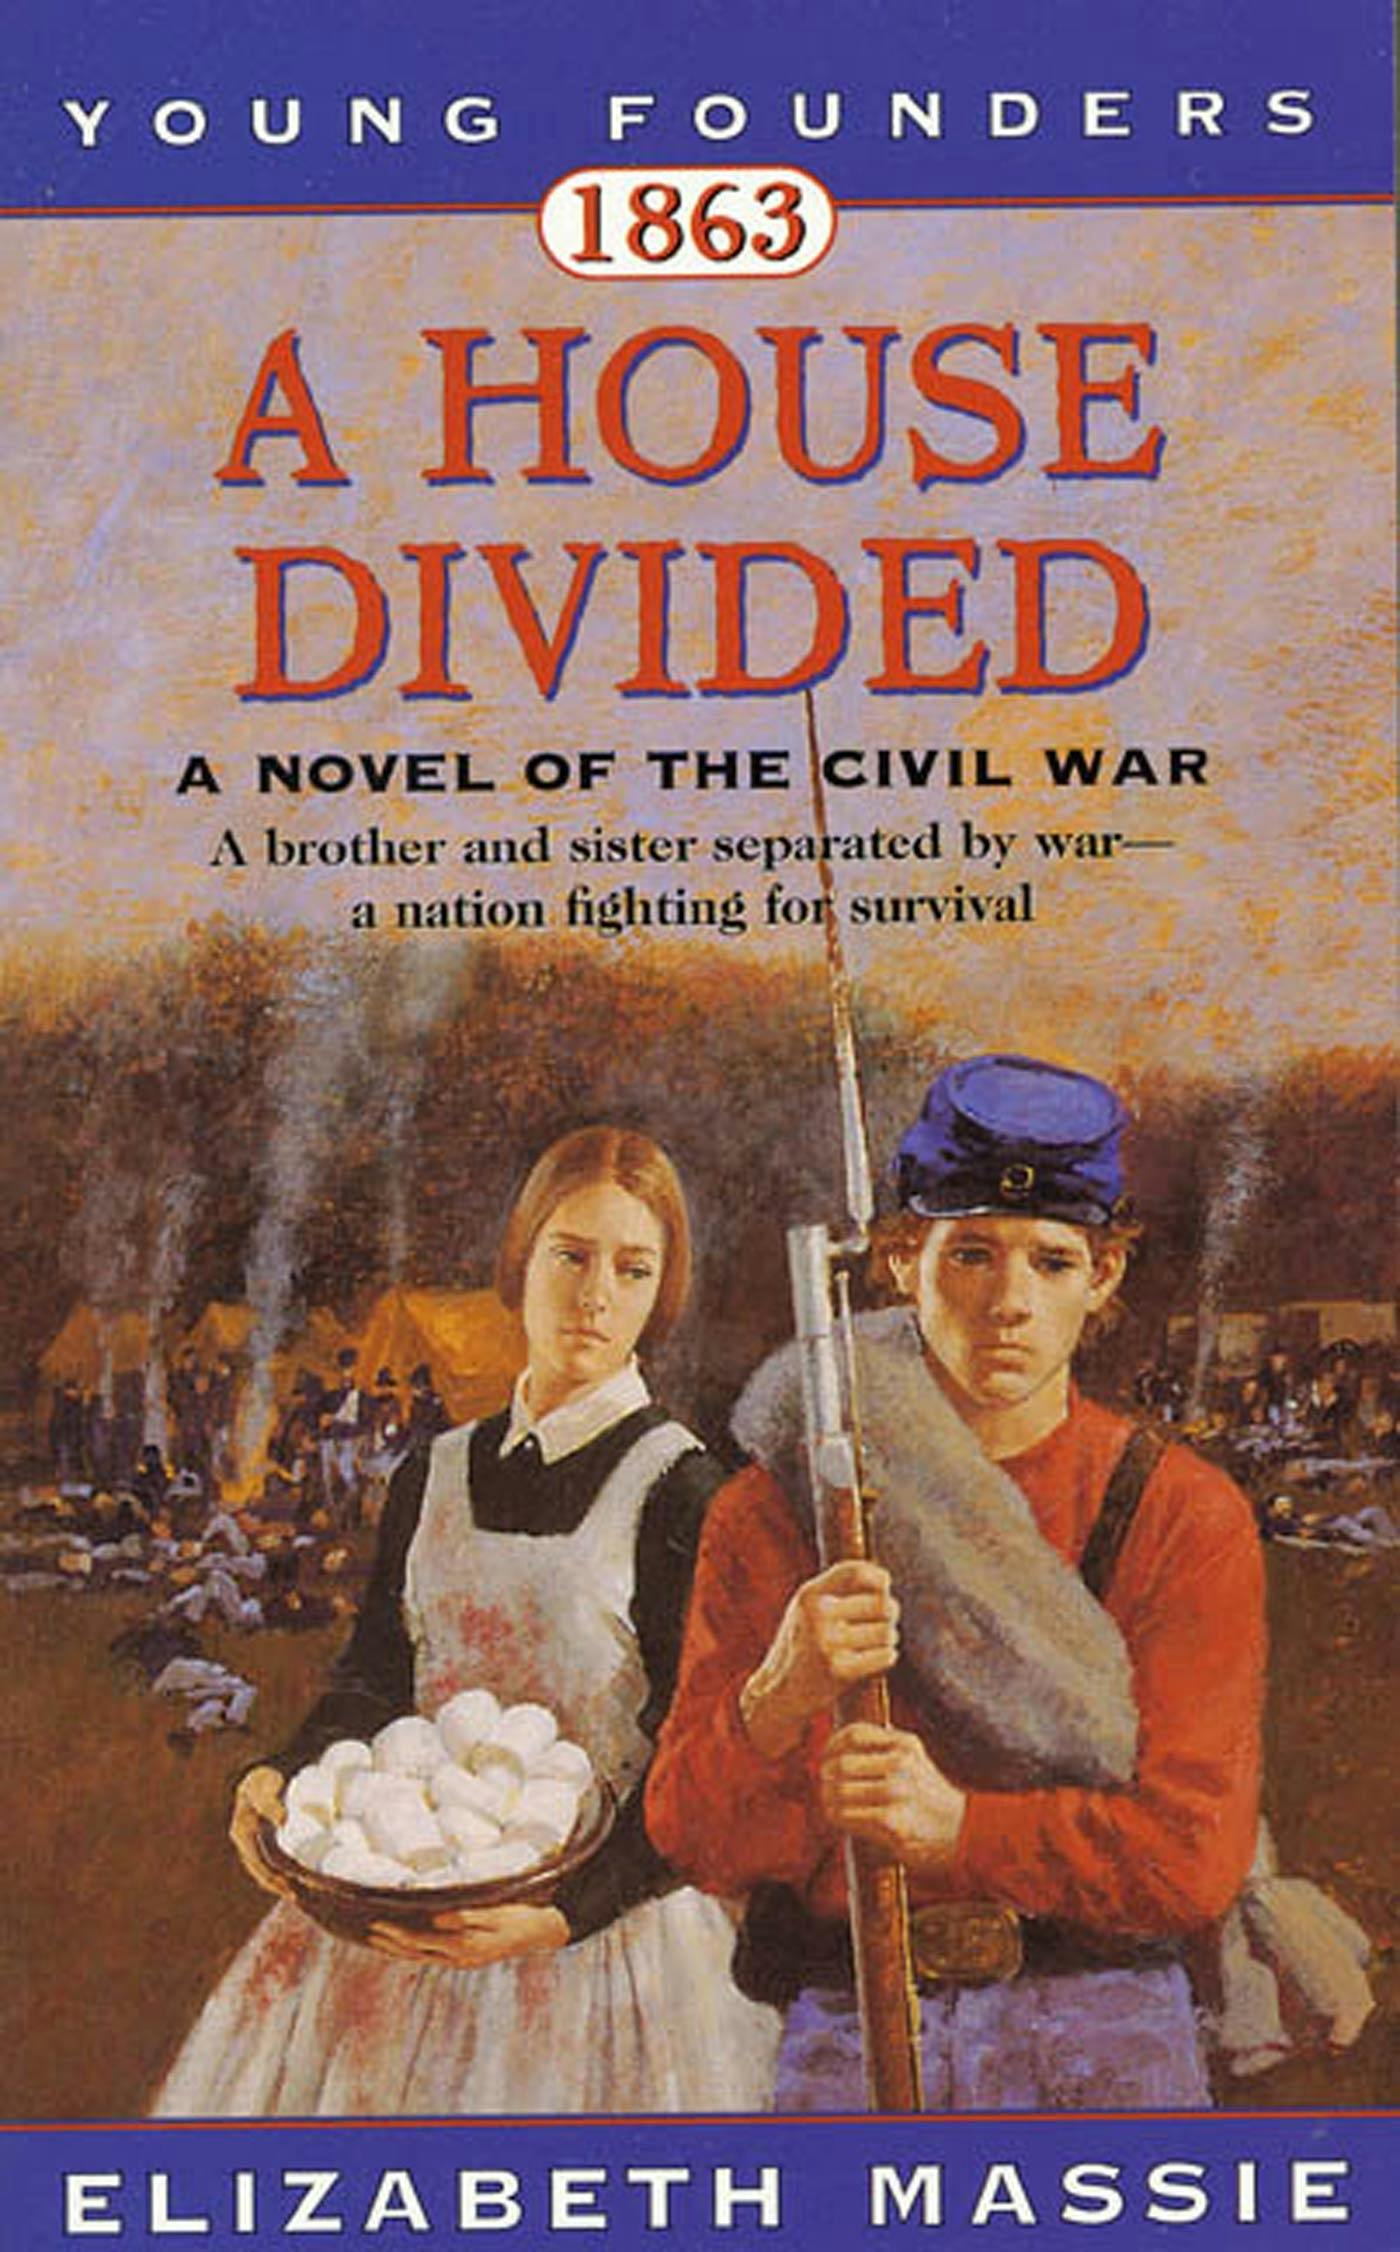 Cover for the book titled as: 1863: A House Divided